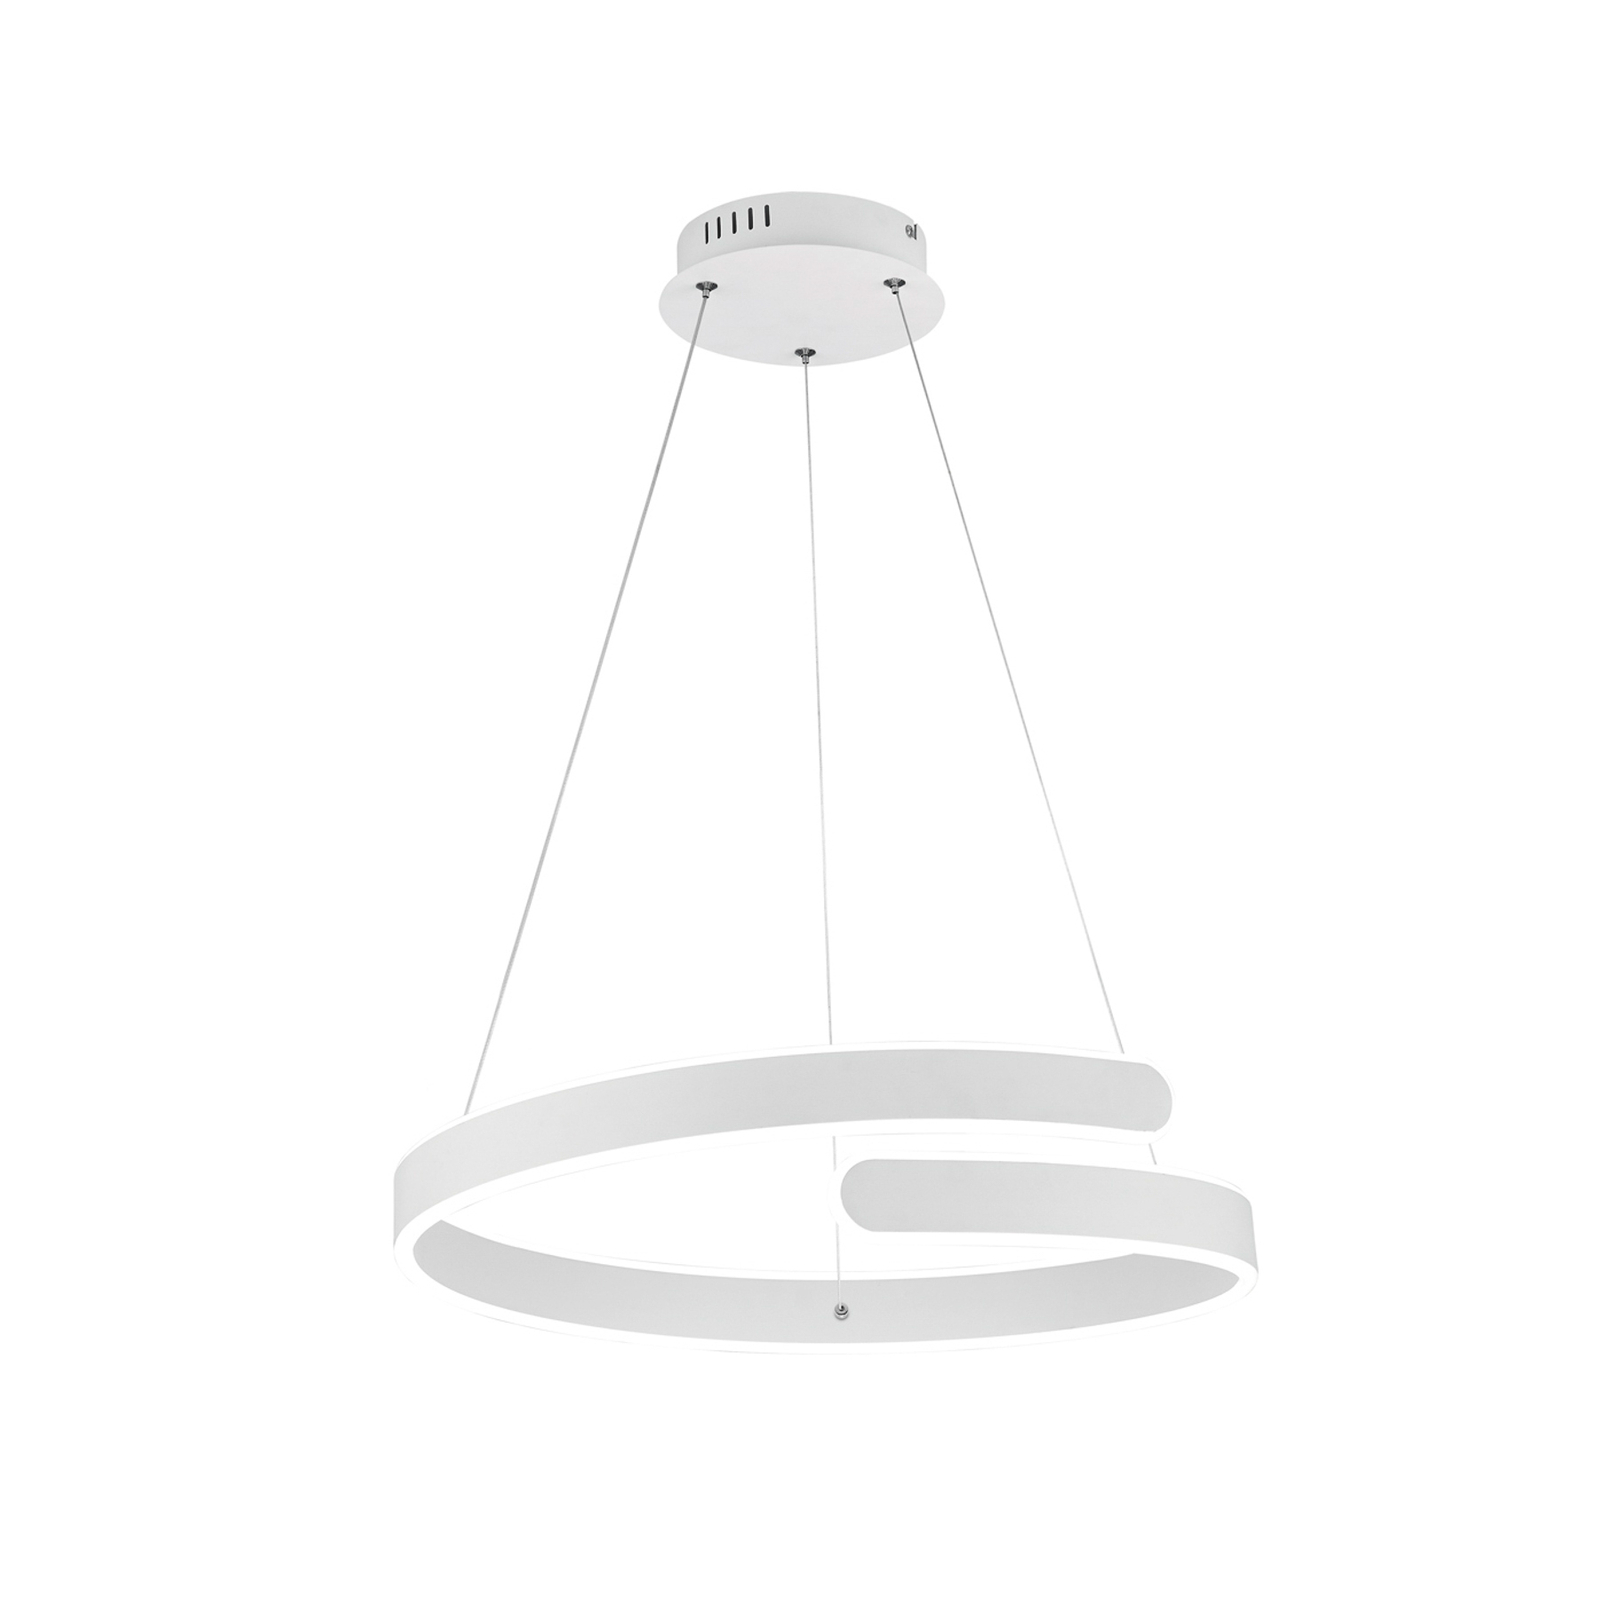 LED hanglamp Parma met Switch-dimmer, wit